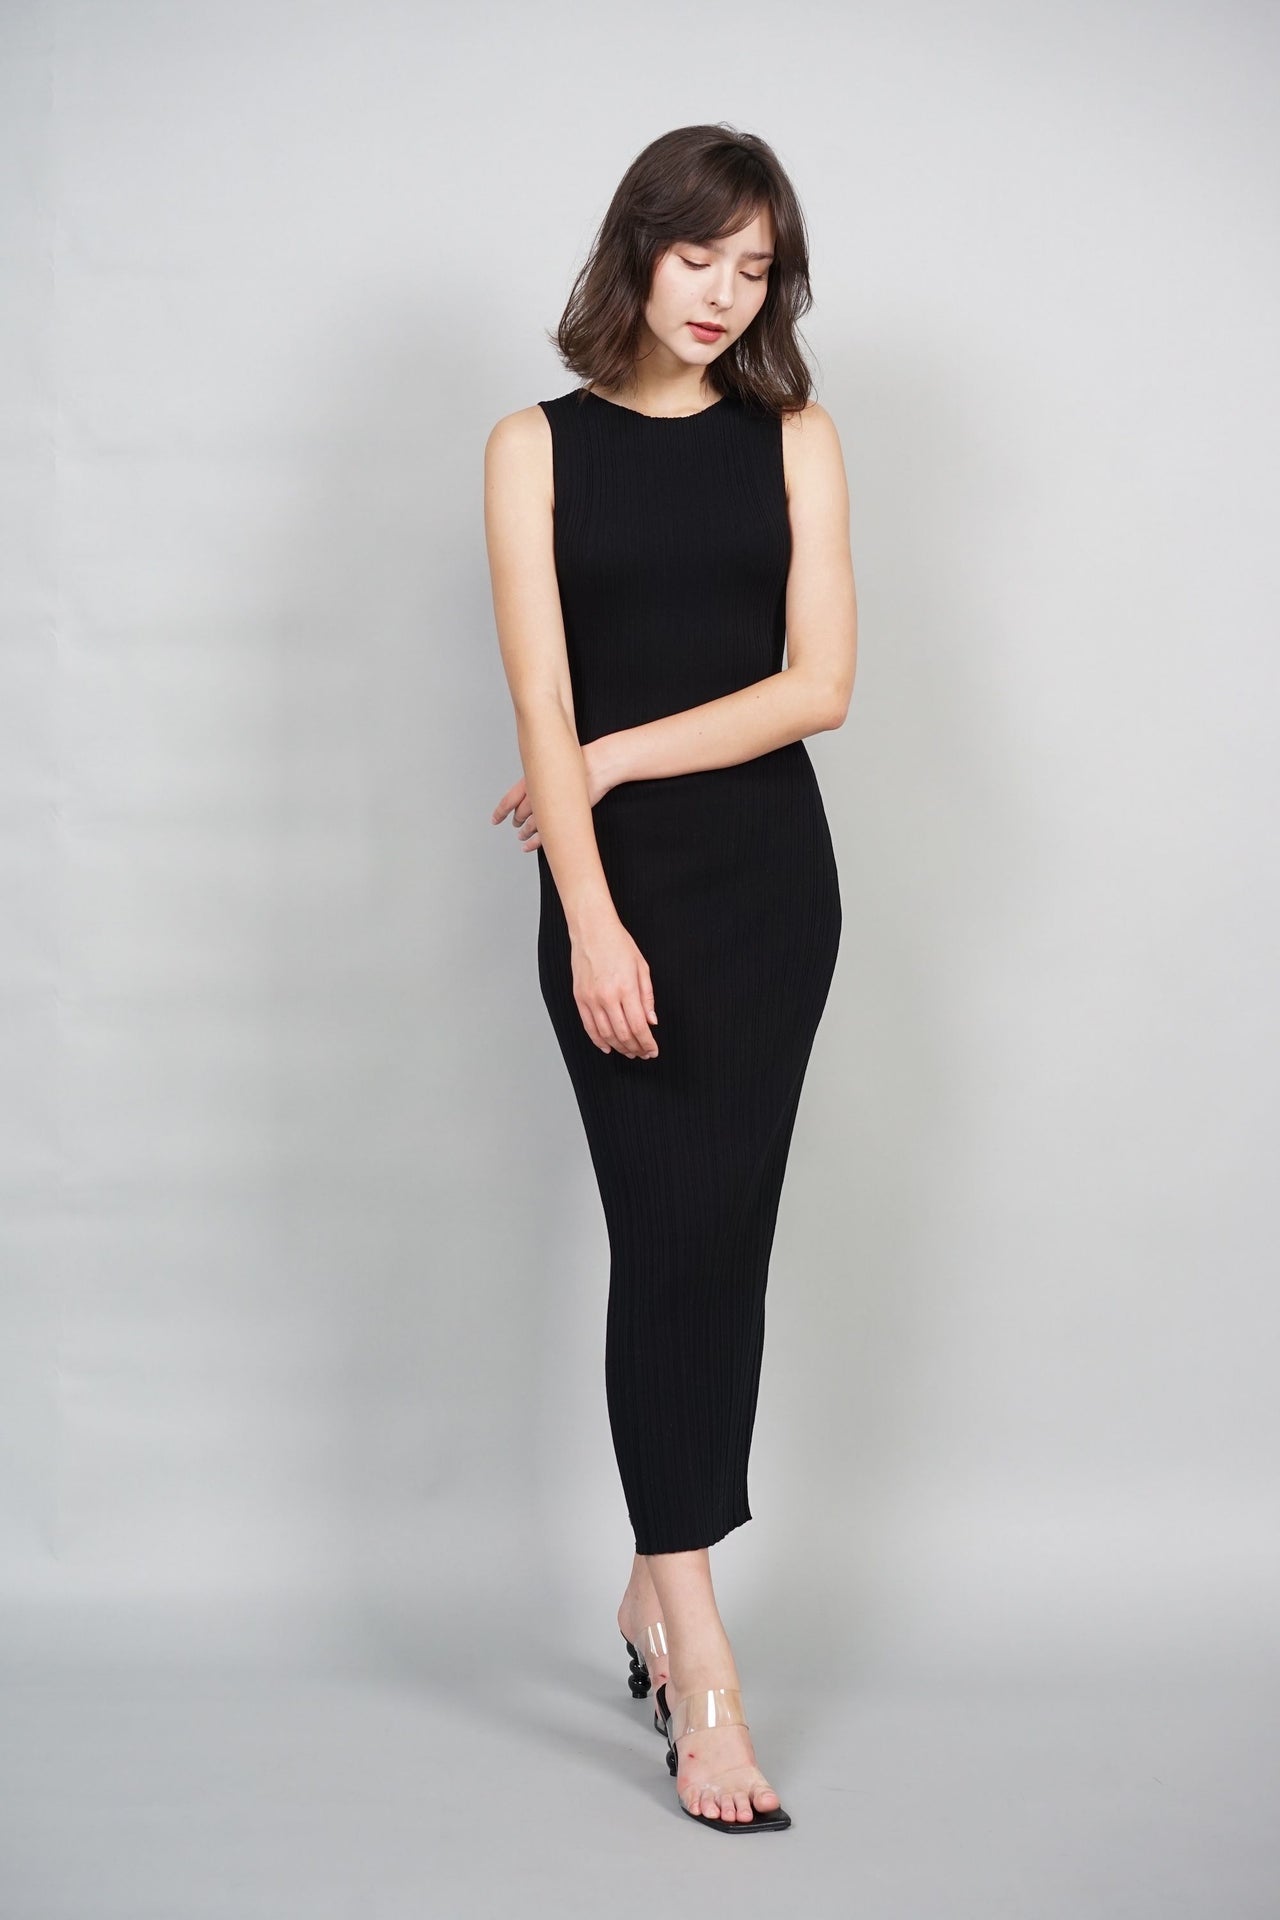 EVERYDAY / Kaia Knit Dress in Black